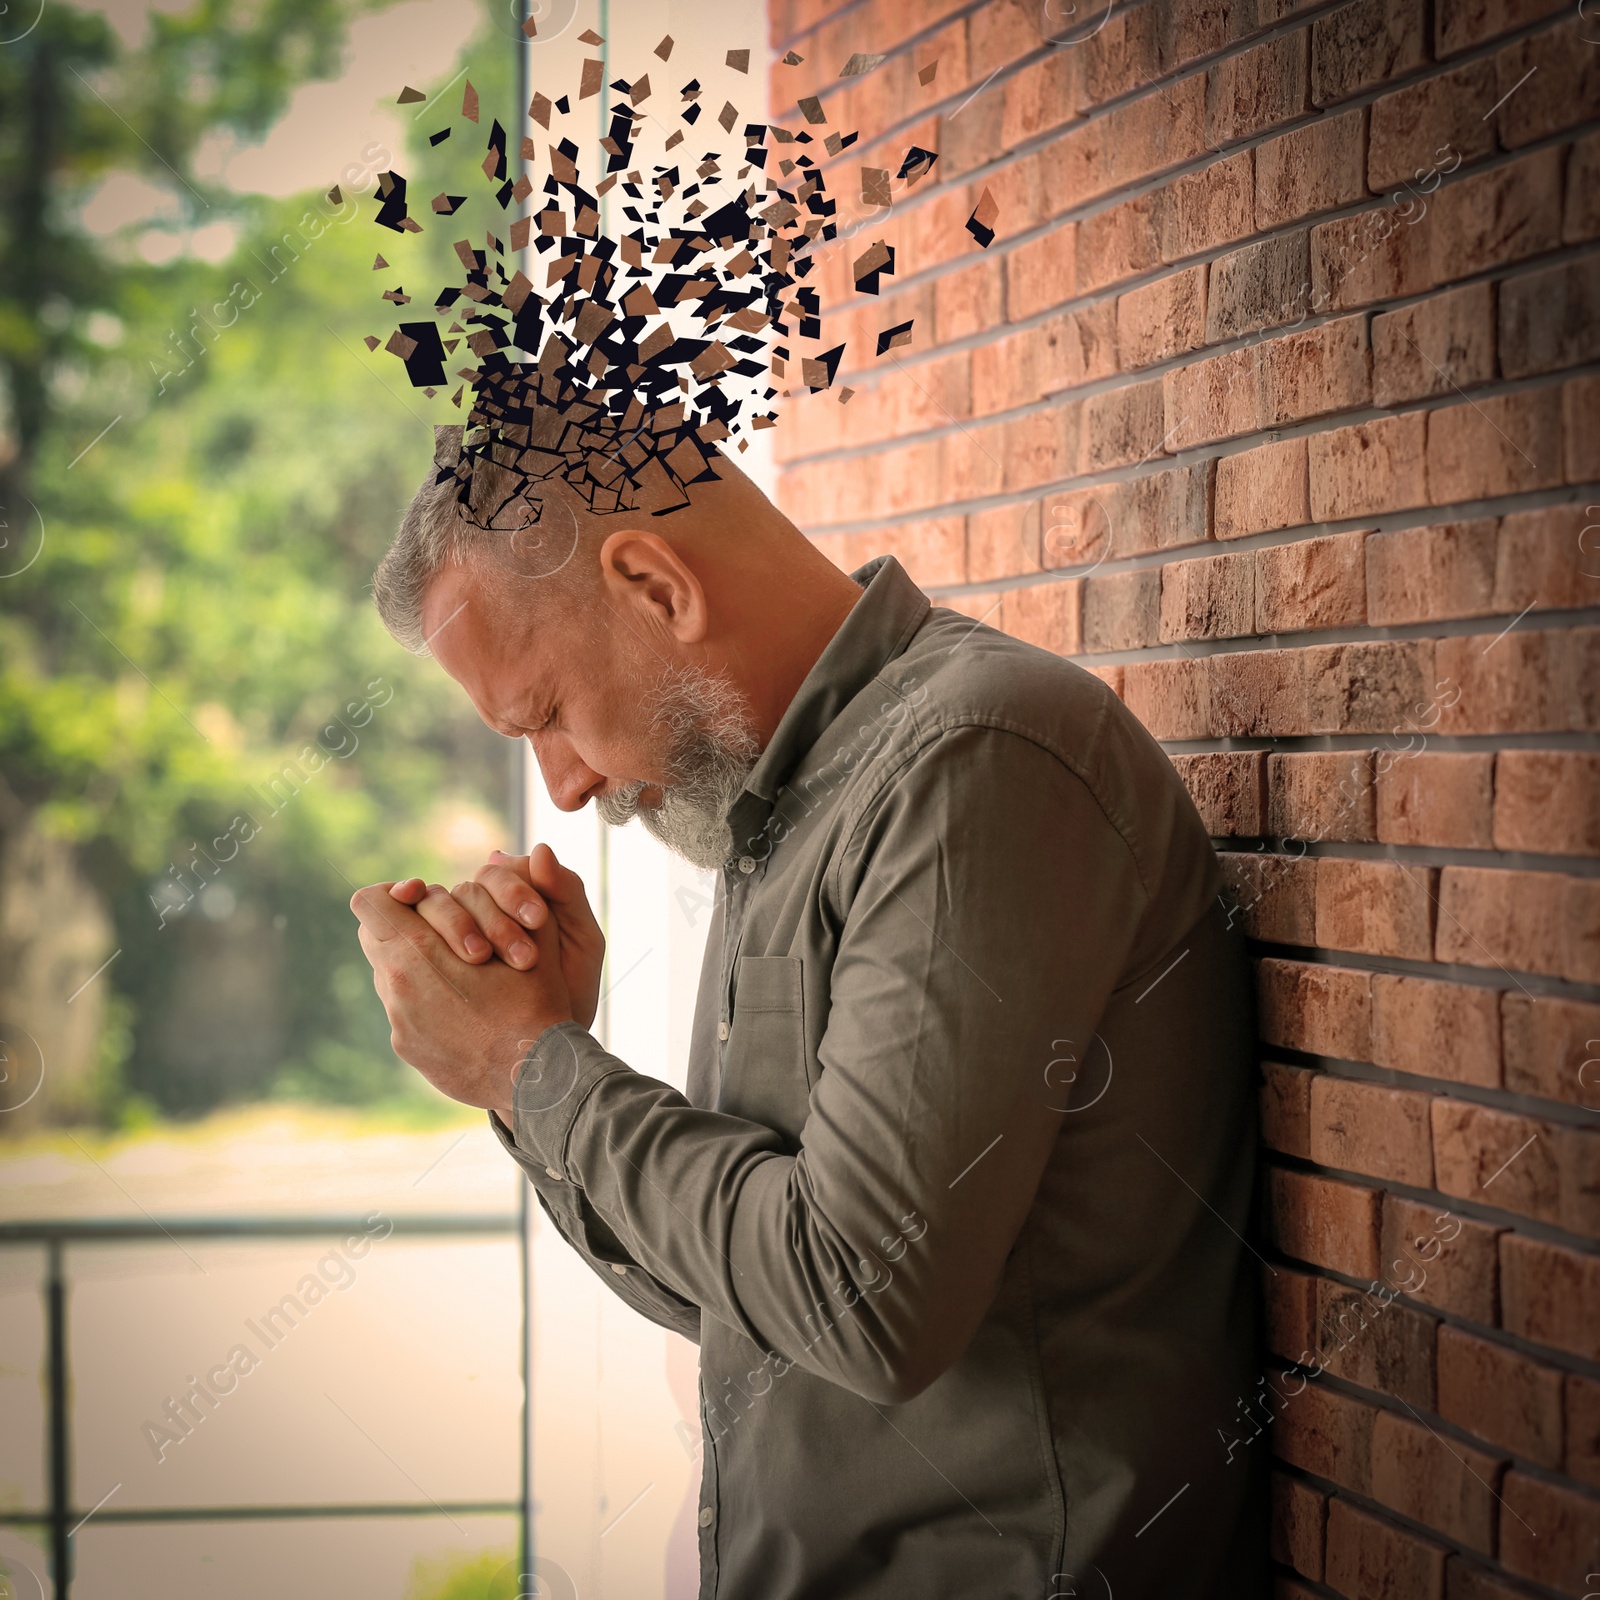 Image of Senior man suffering from dementia indoors. Illustration of head falling apart into shards